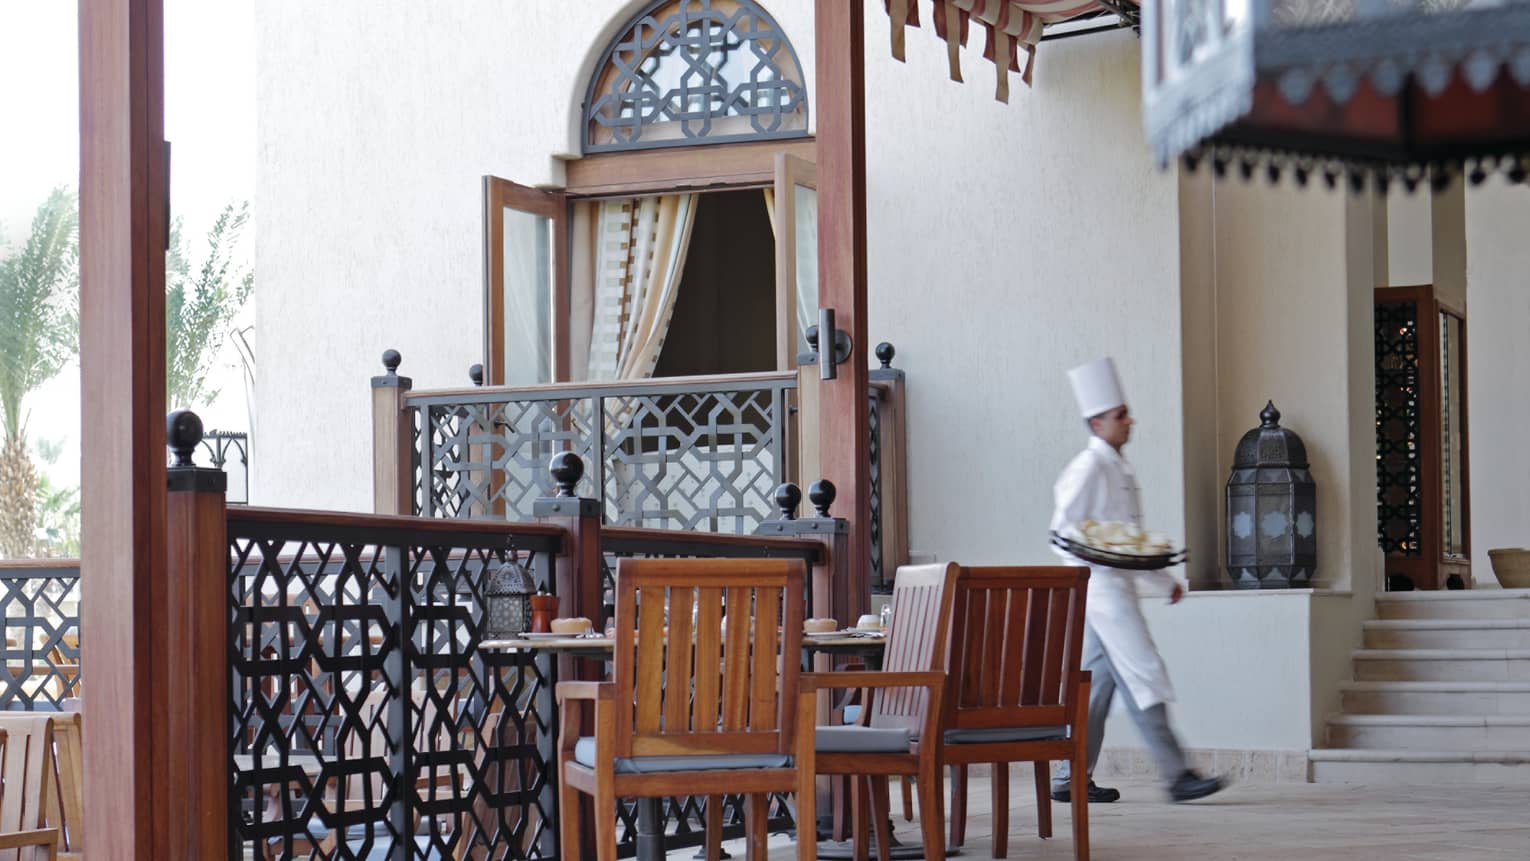 Chef in white uniform walks past wood patio tables, chairs, decorative railing at Arabesque restaurant